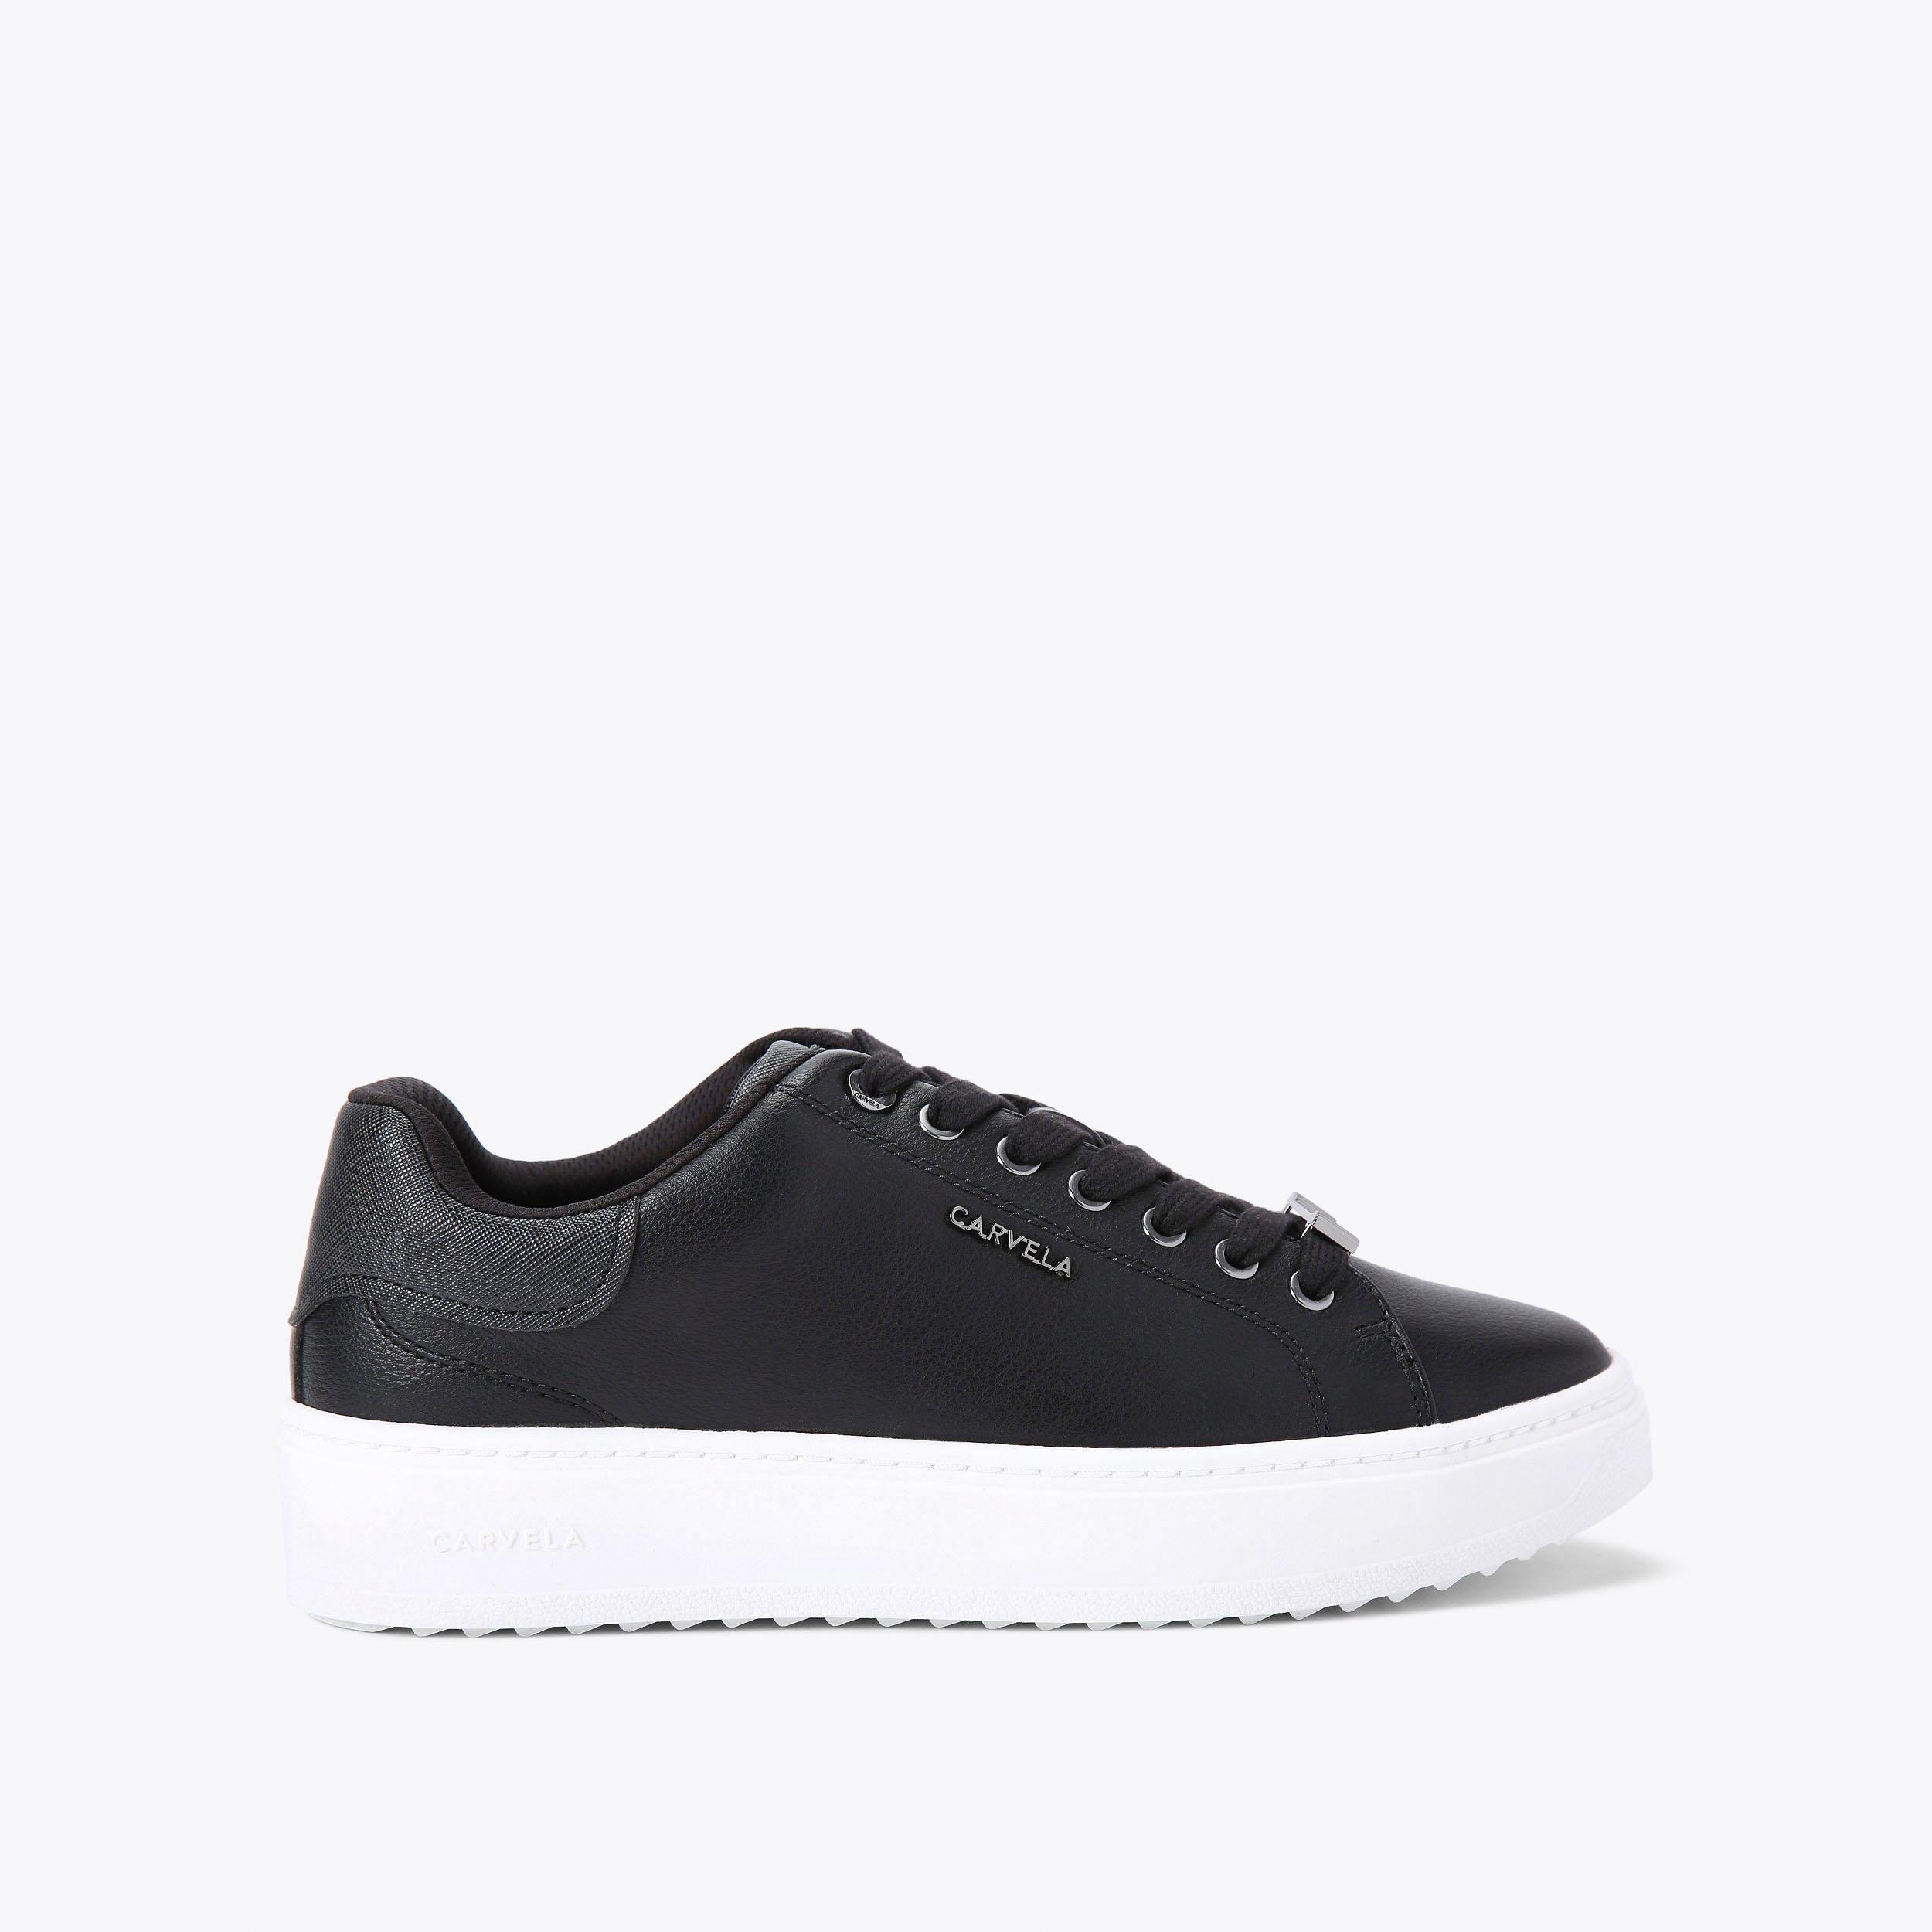 DREAM Black Trainers by CARVELA